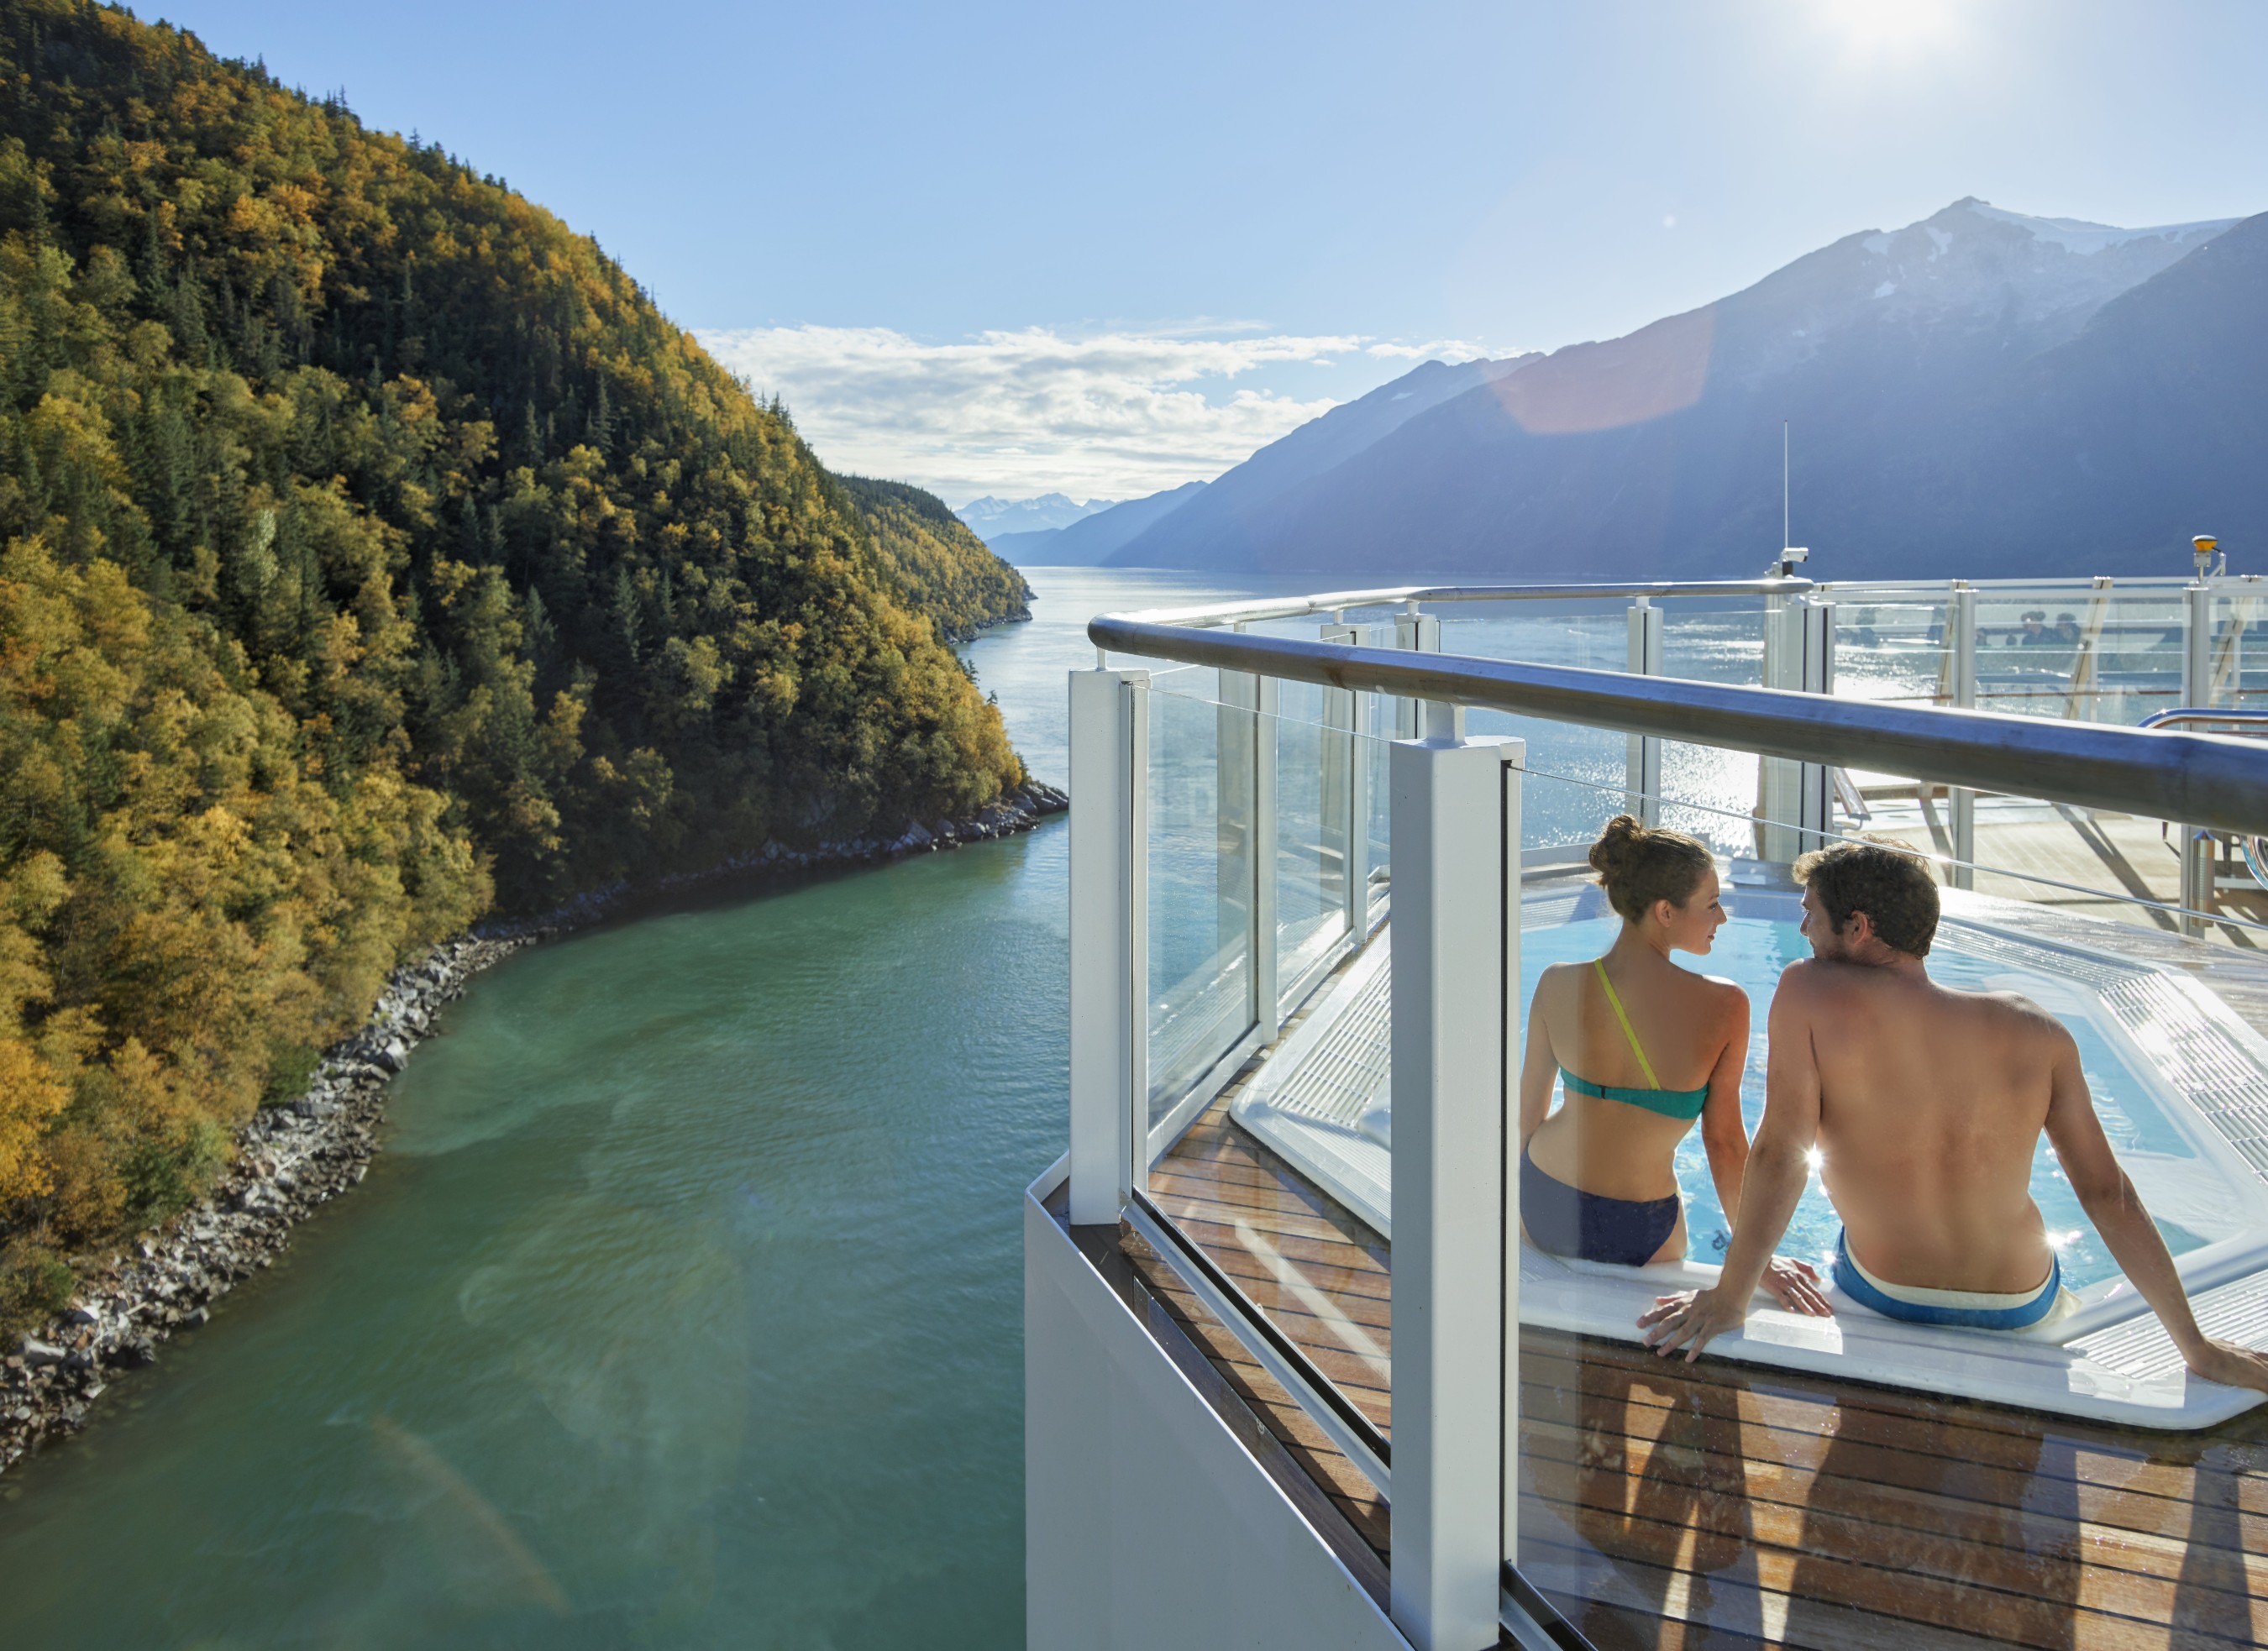 From guaranteed glacier viewings to world-class amenities, travelers can discover the best way to experience Alaska with Norwegian Cruise Line.